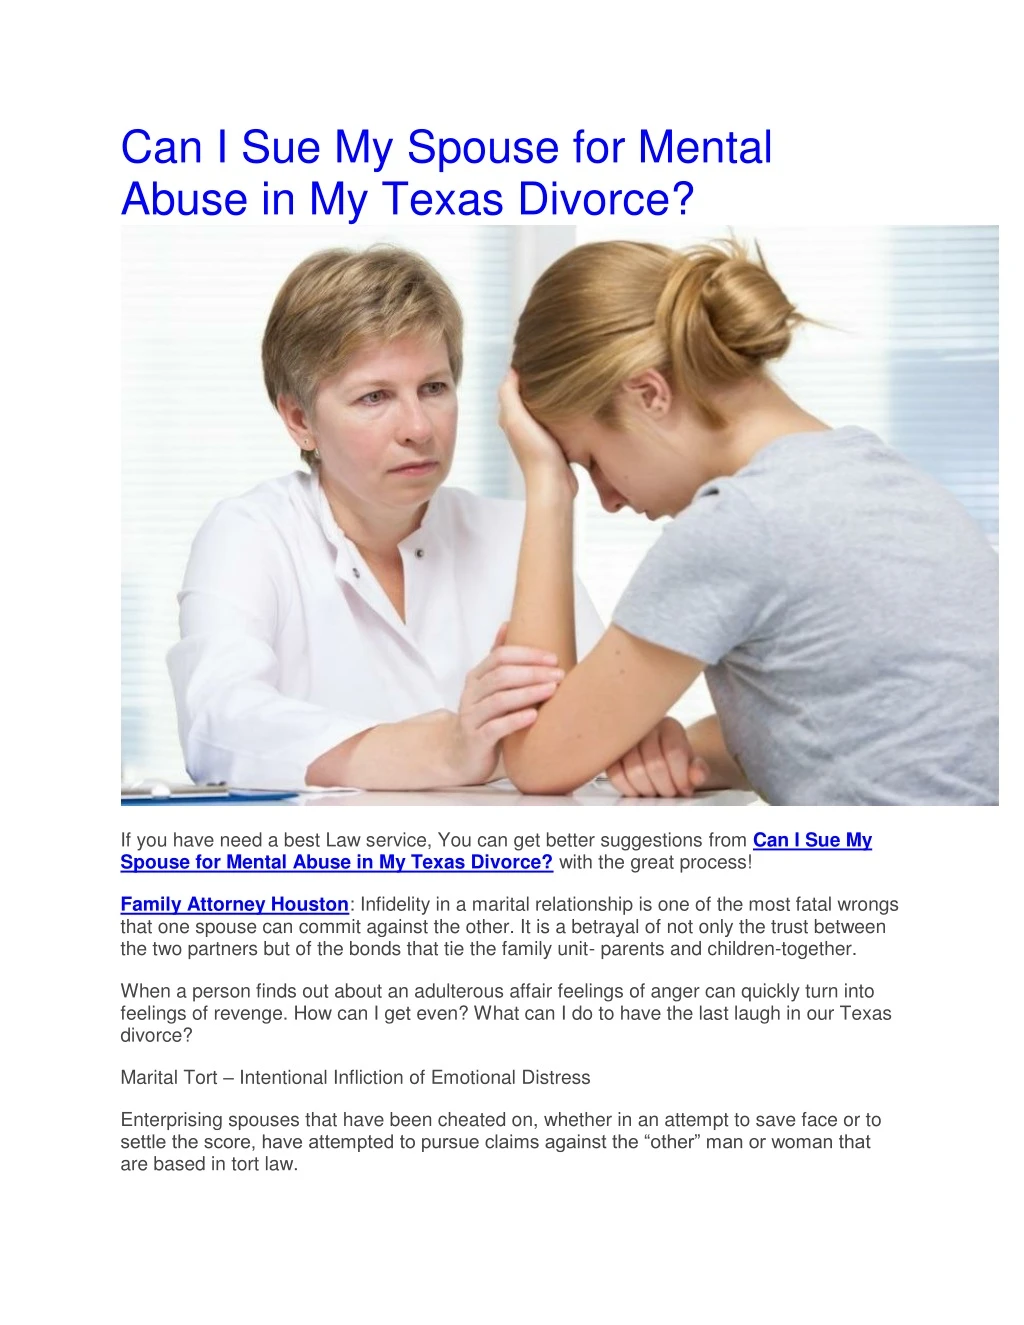 can i sue my spouse for mental abuse in my texas